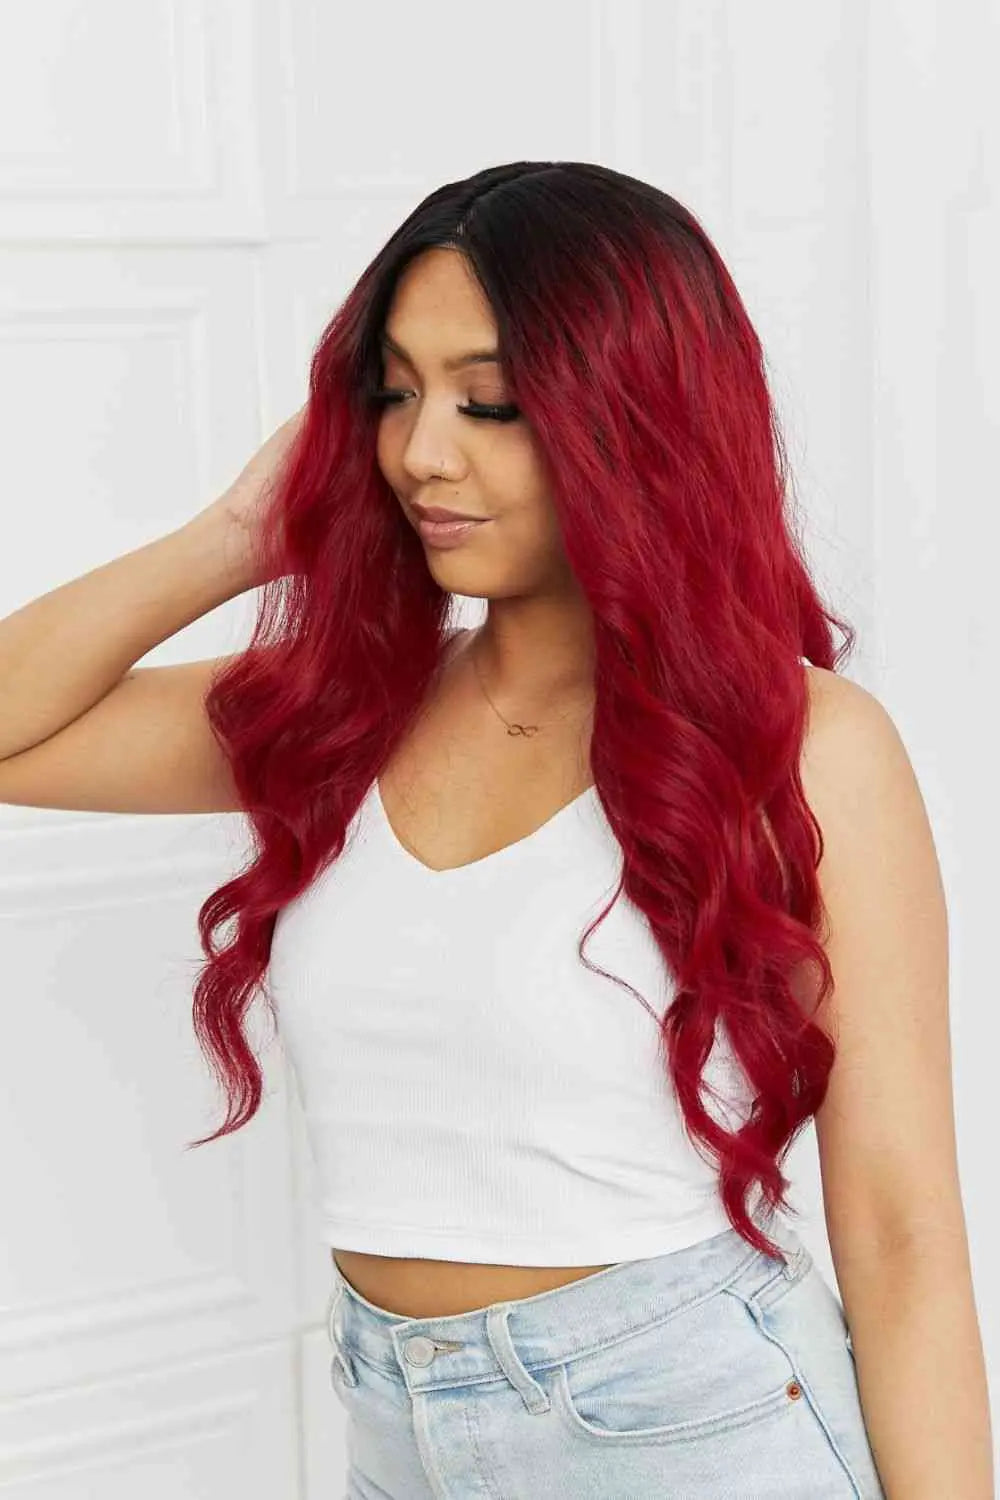 13x2" Lace Front Wigs Synthetic Wave 24" 150% Density - Image #4